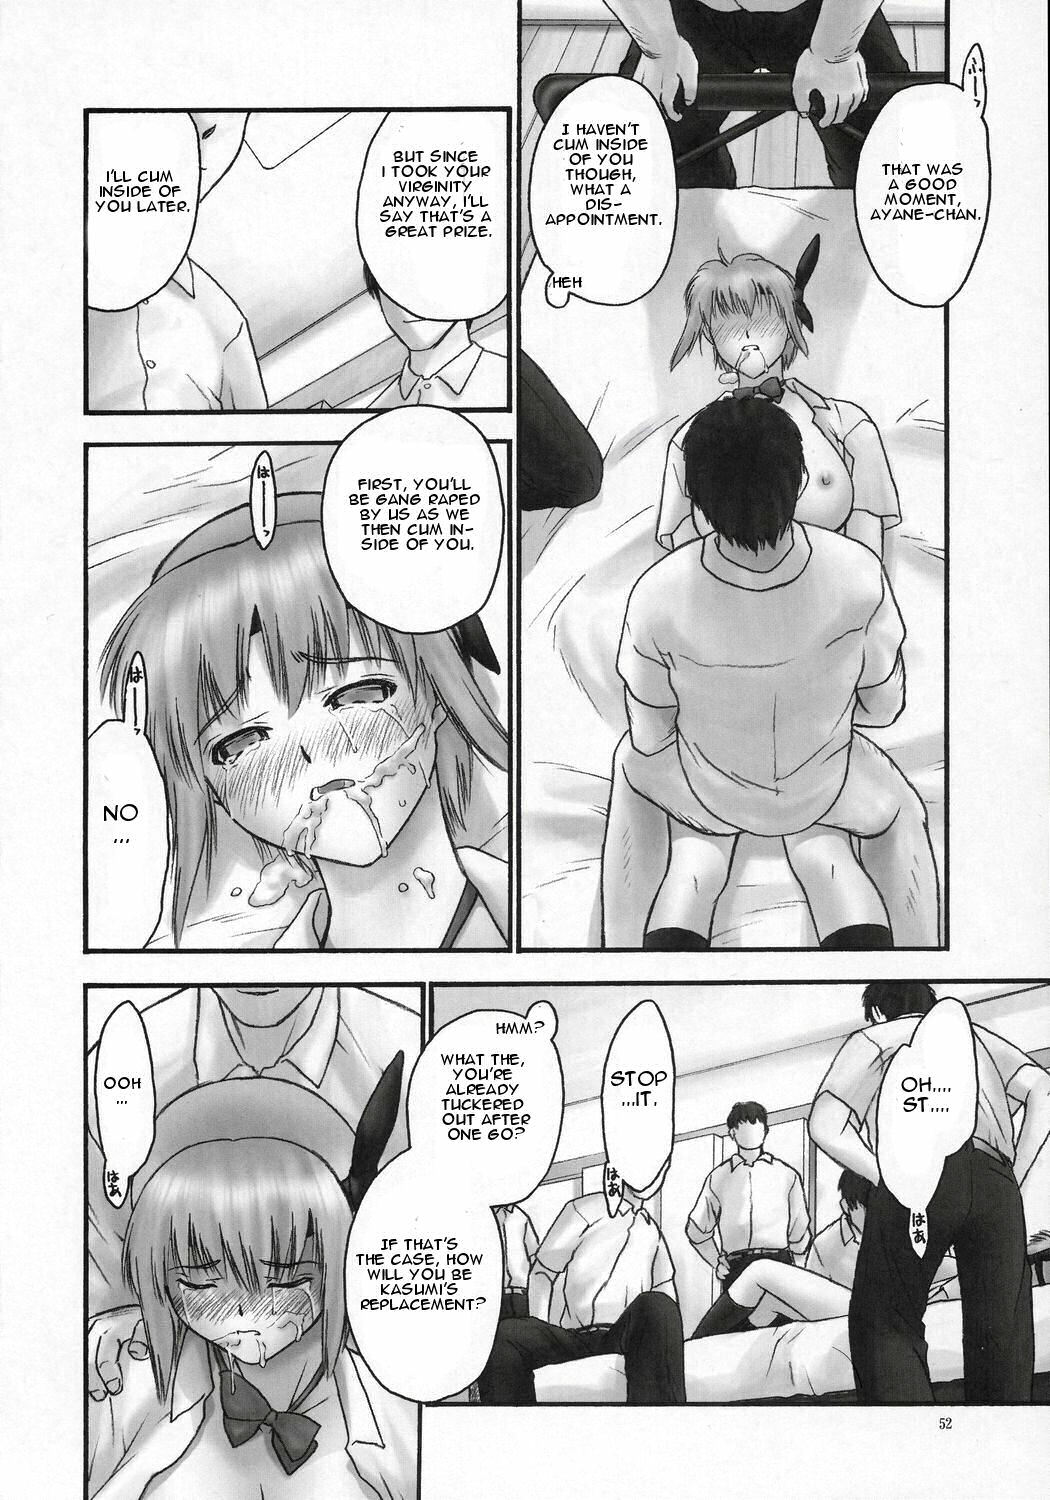 (C71) [Hellabunna (Iruma Kamiri)] Rei Chapter 03: Involve Slave to the Grind (Dead or Alive) [English] [One of a Kind Productions] page 51 full